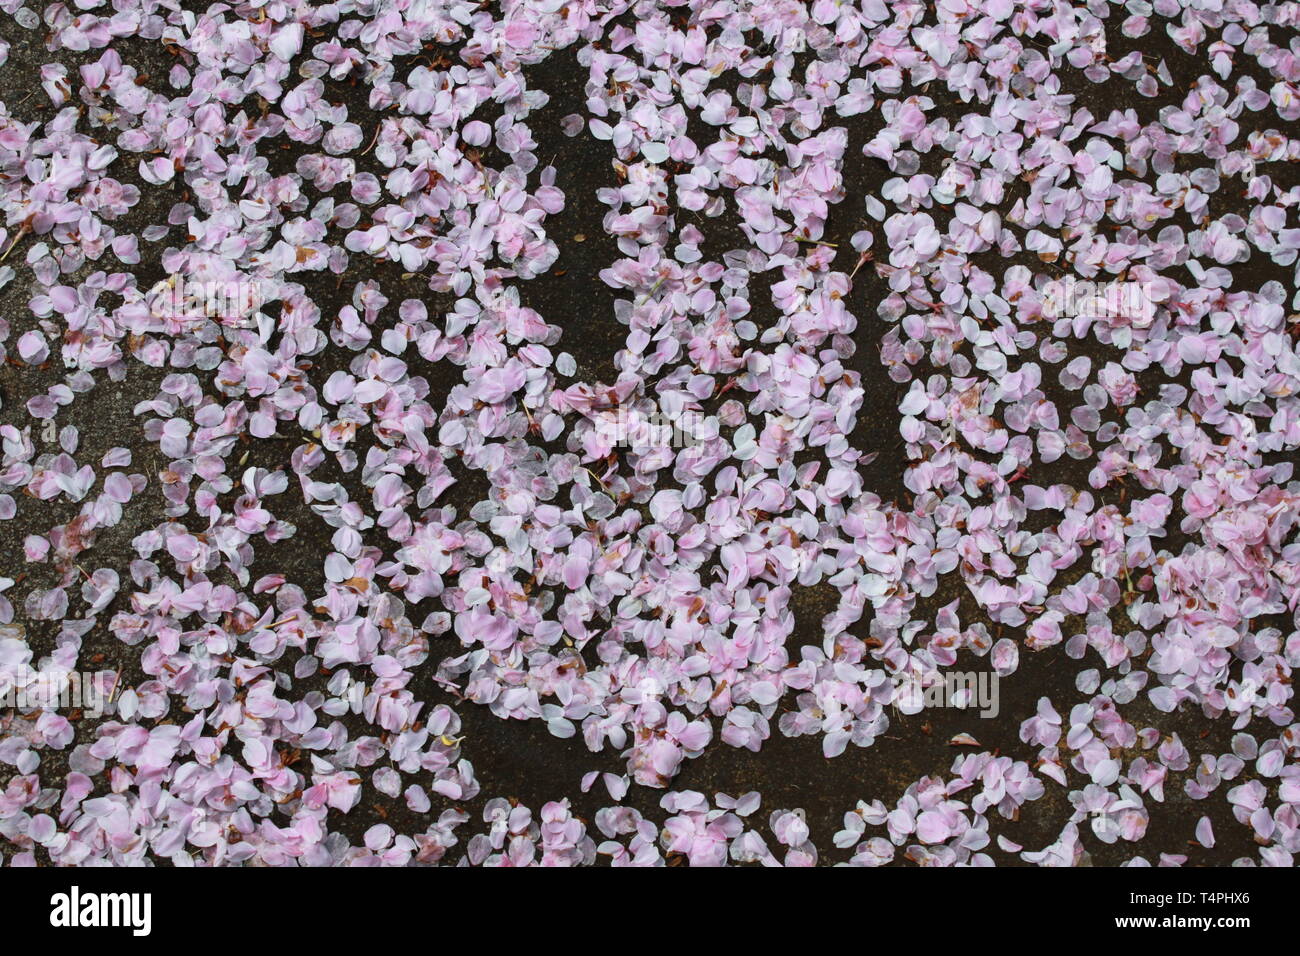 Happy face in dogwood flower petals Stock Photo